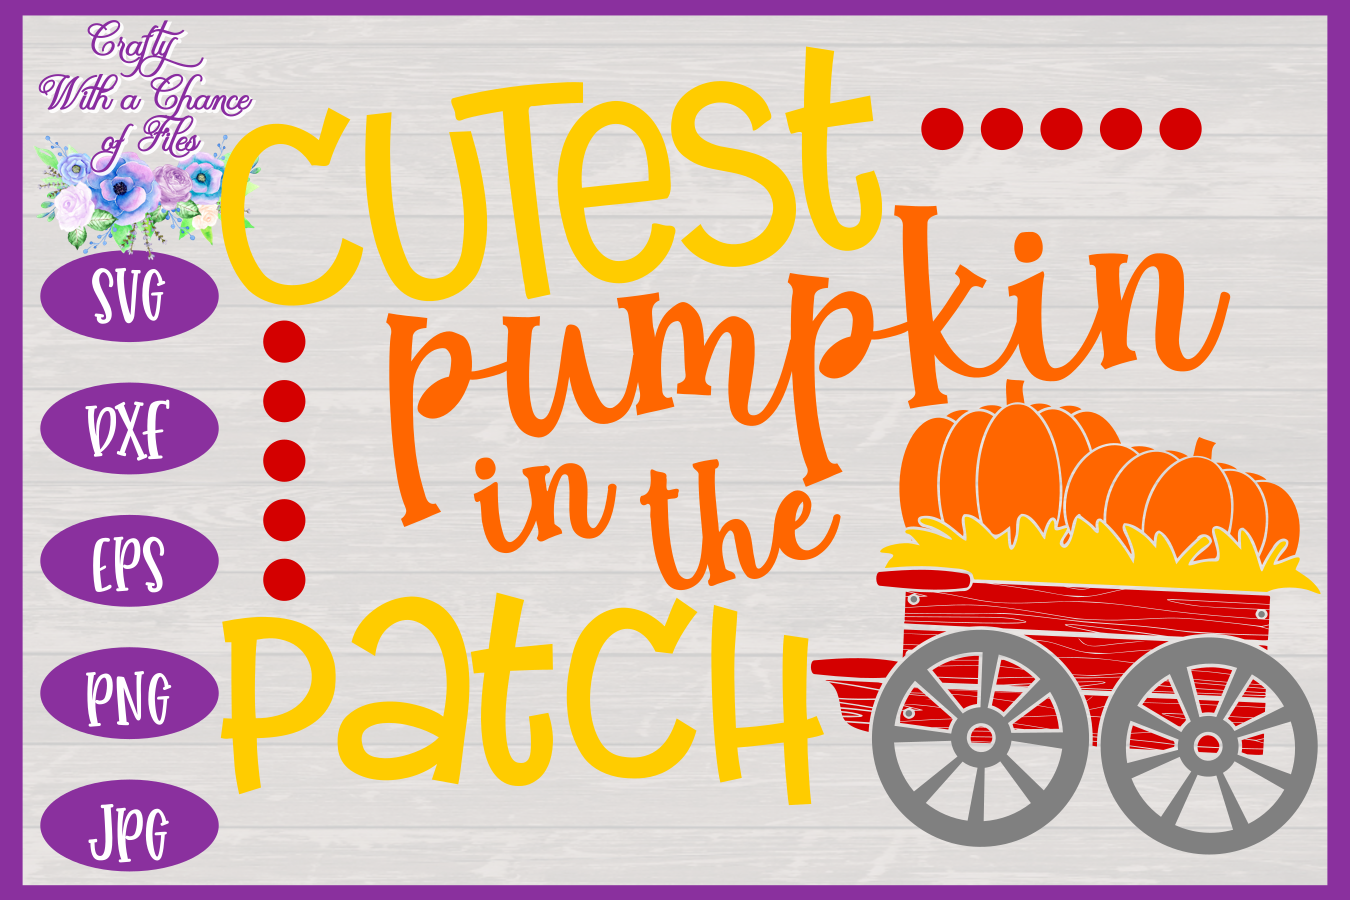 Cutest Pumpkin In The Patch Svg Halloween Svg Fall Svg Autumn By Crafty With A Chance Of Files Thehungryjpeg Com